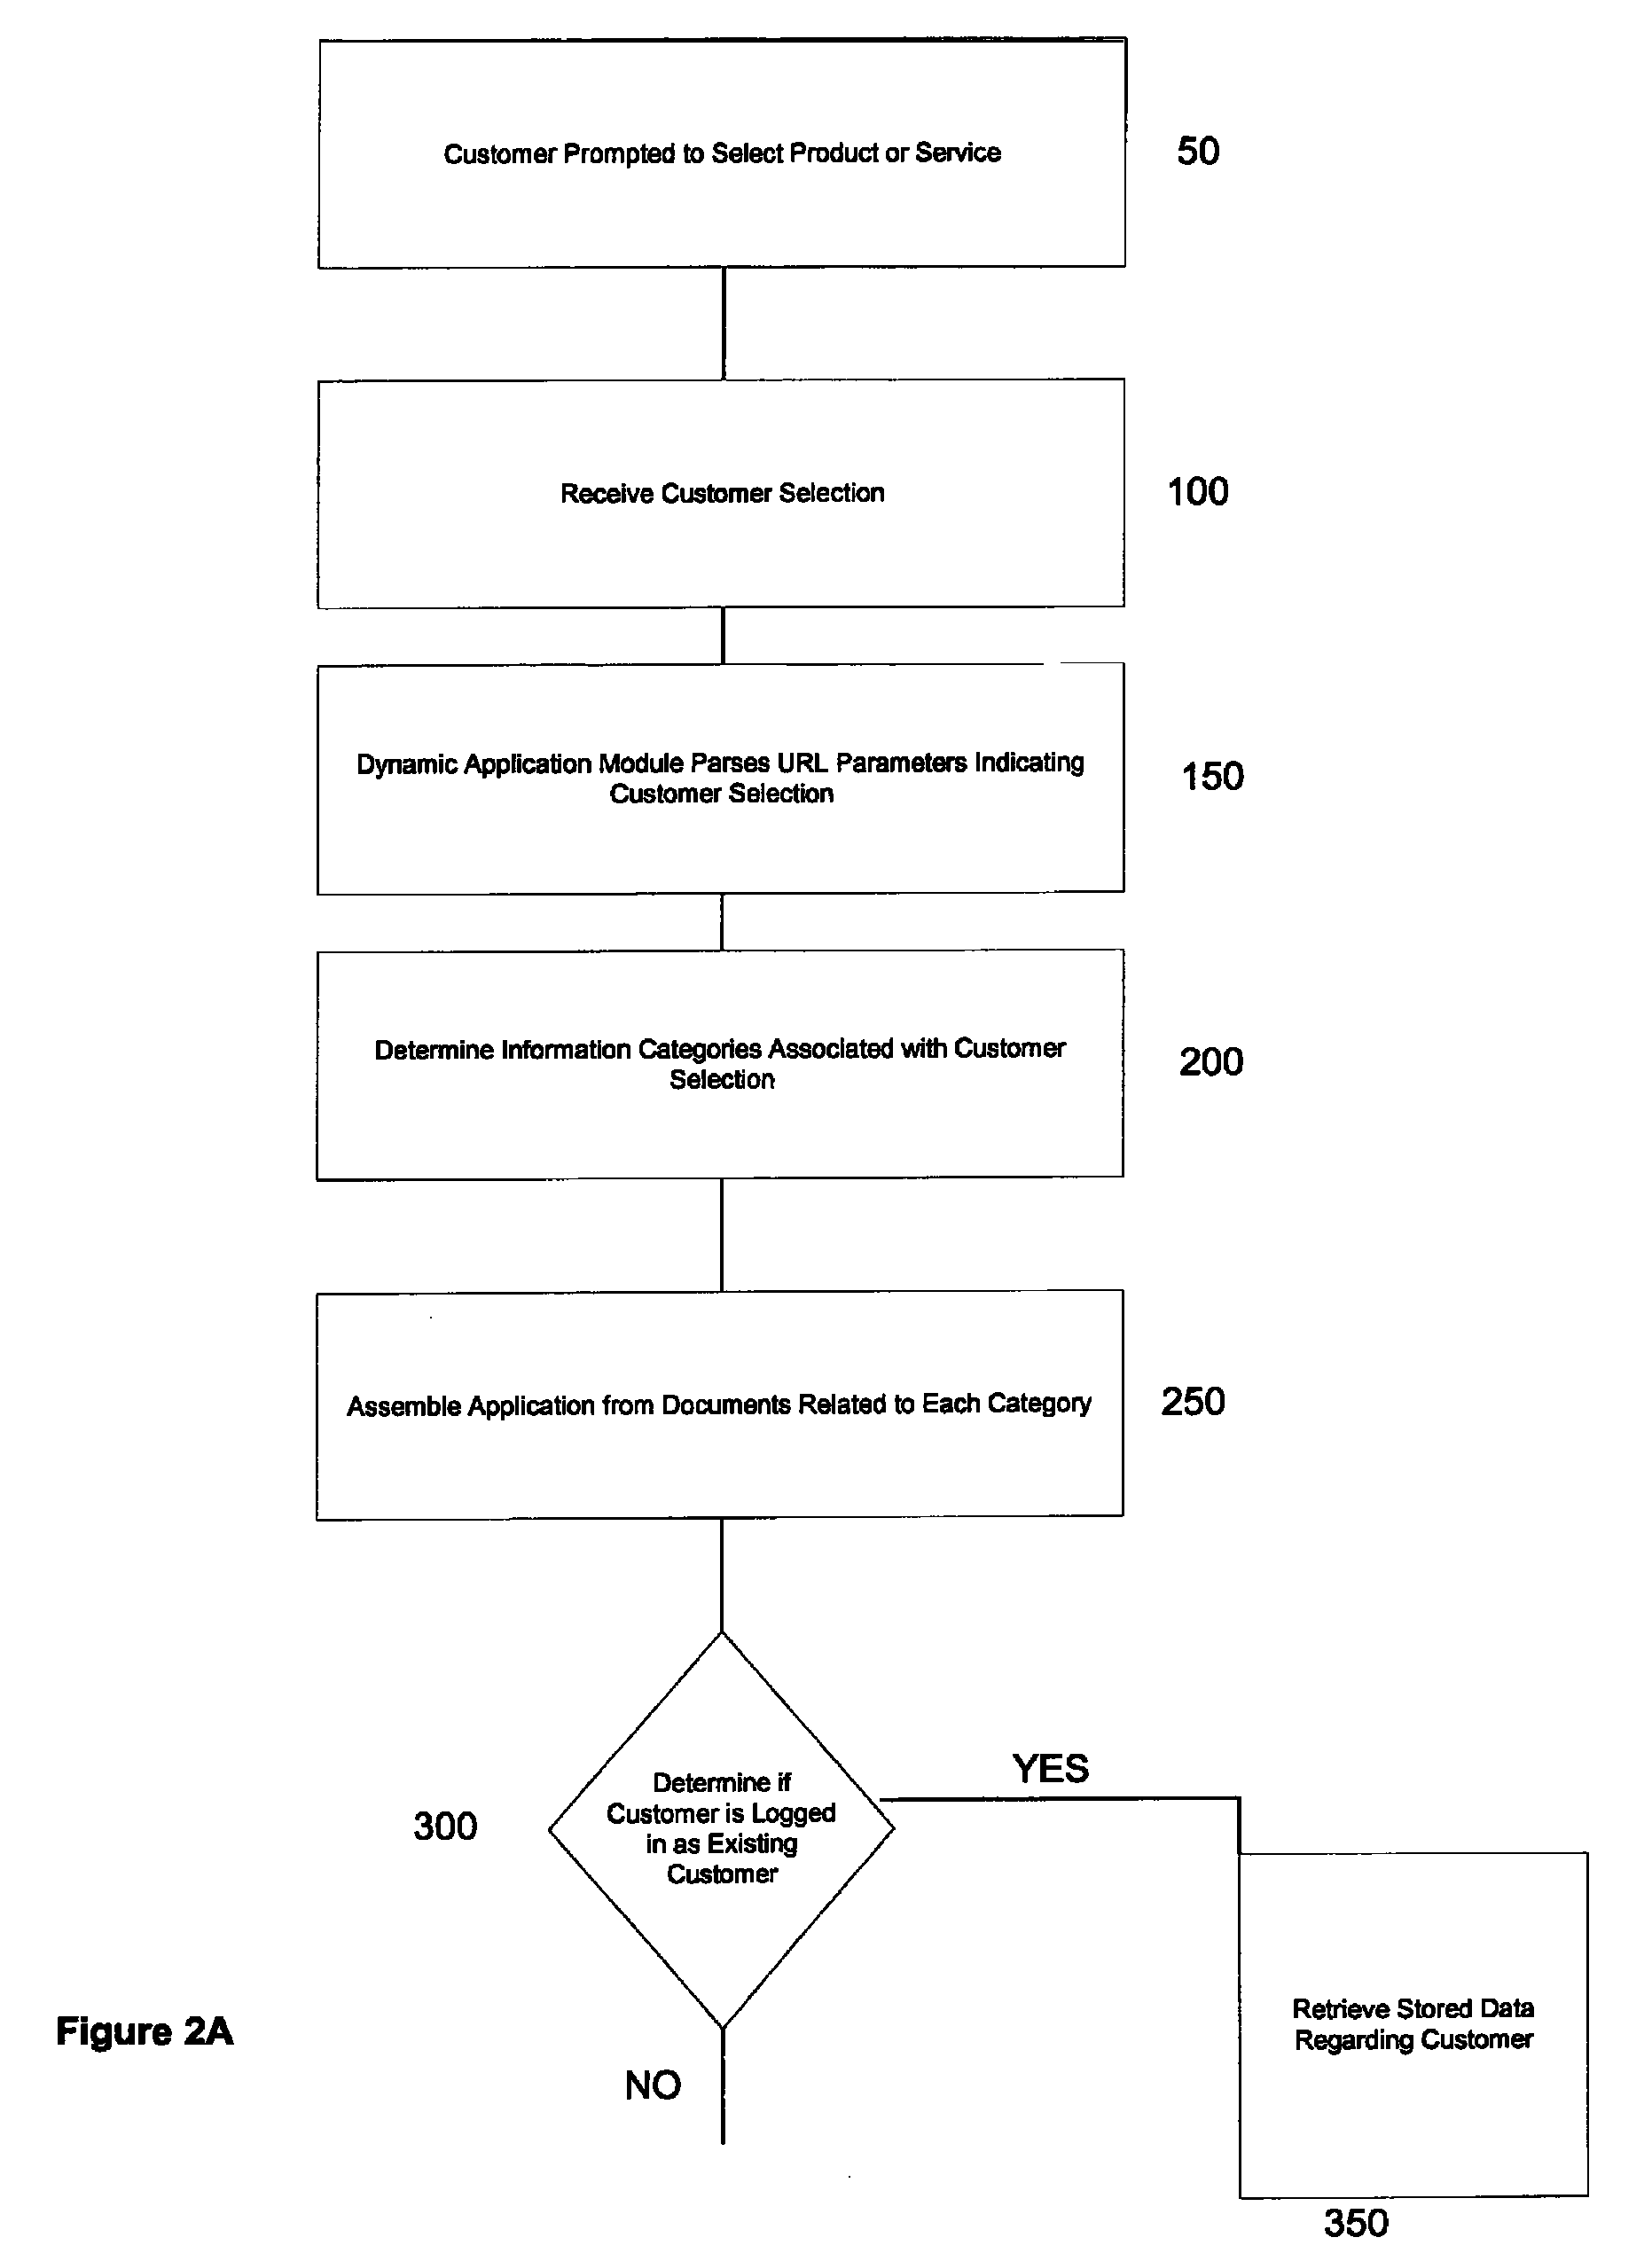 System and method for implementing a consolidated application process